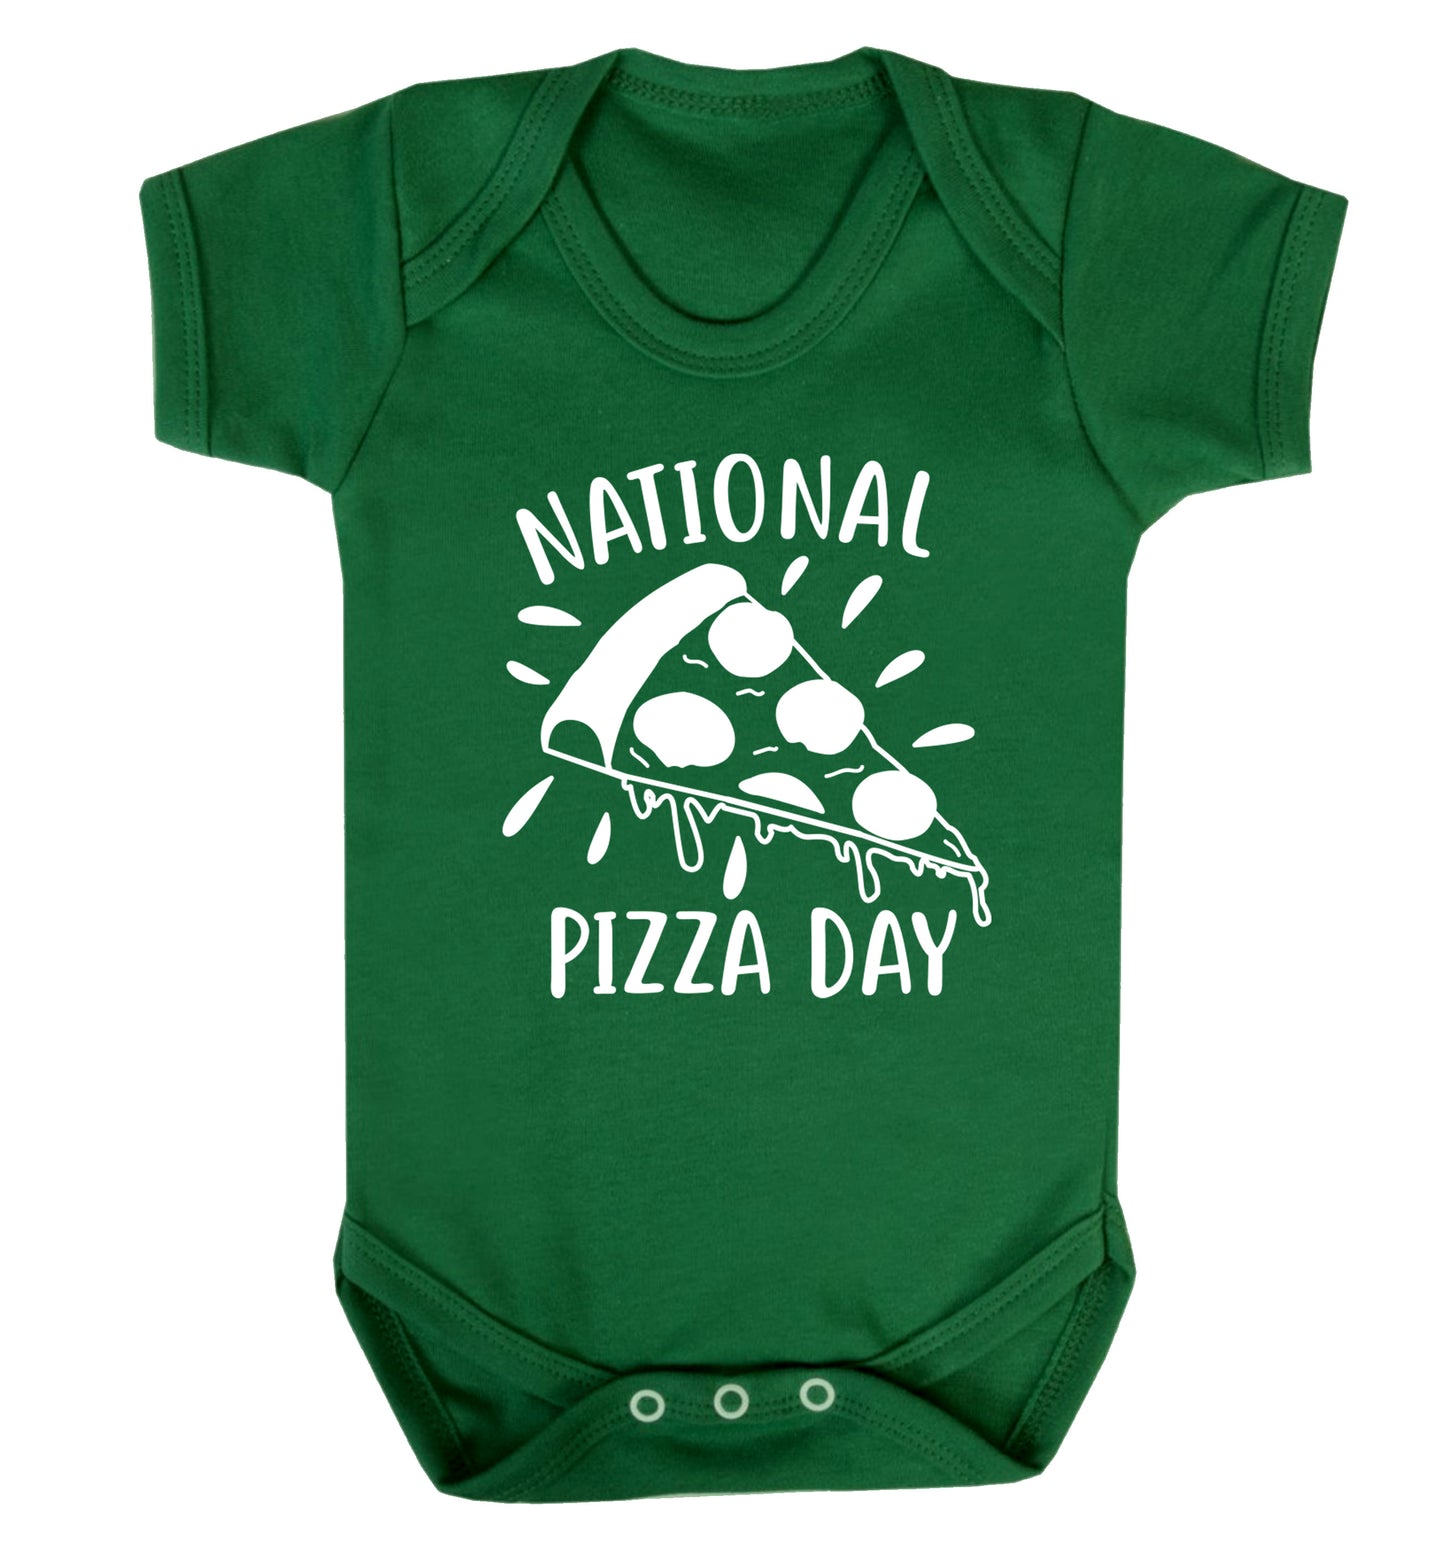 National pizza day Baby Vest green 18-24 months